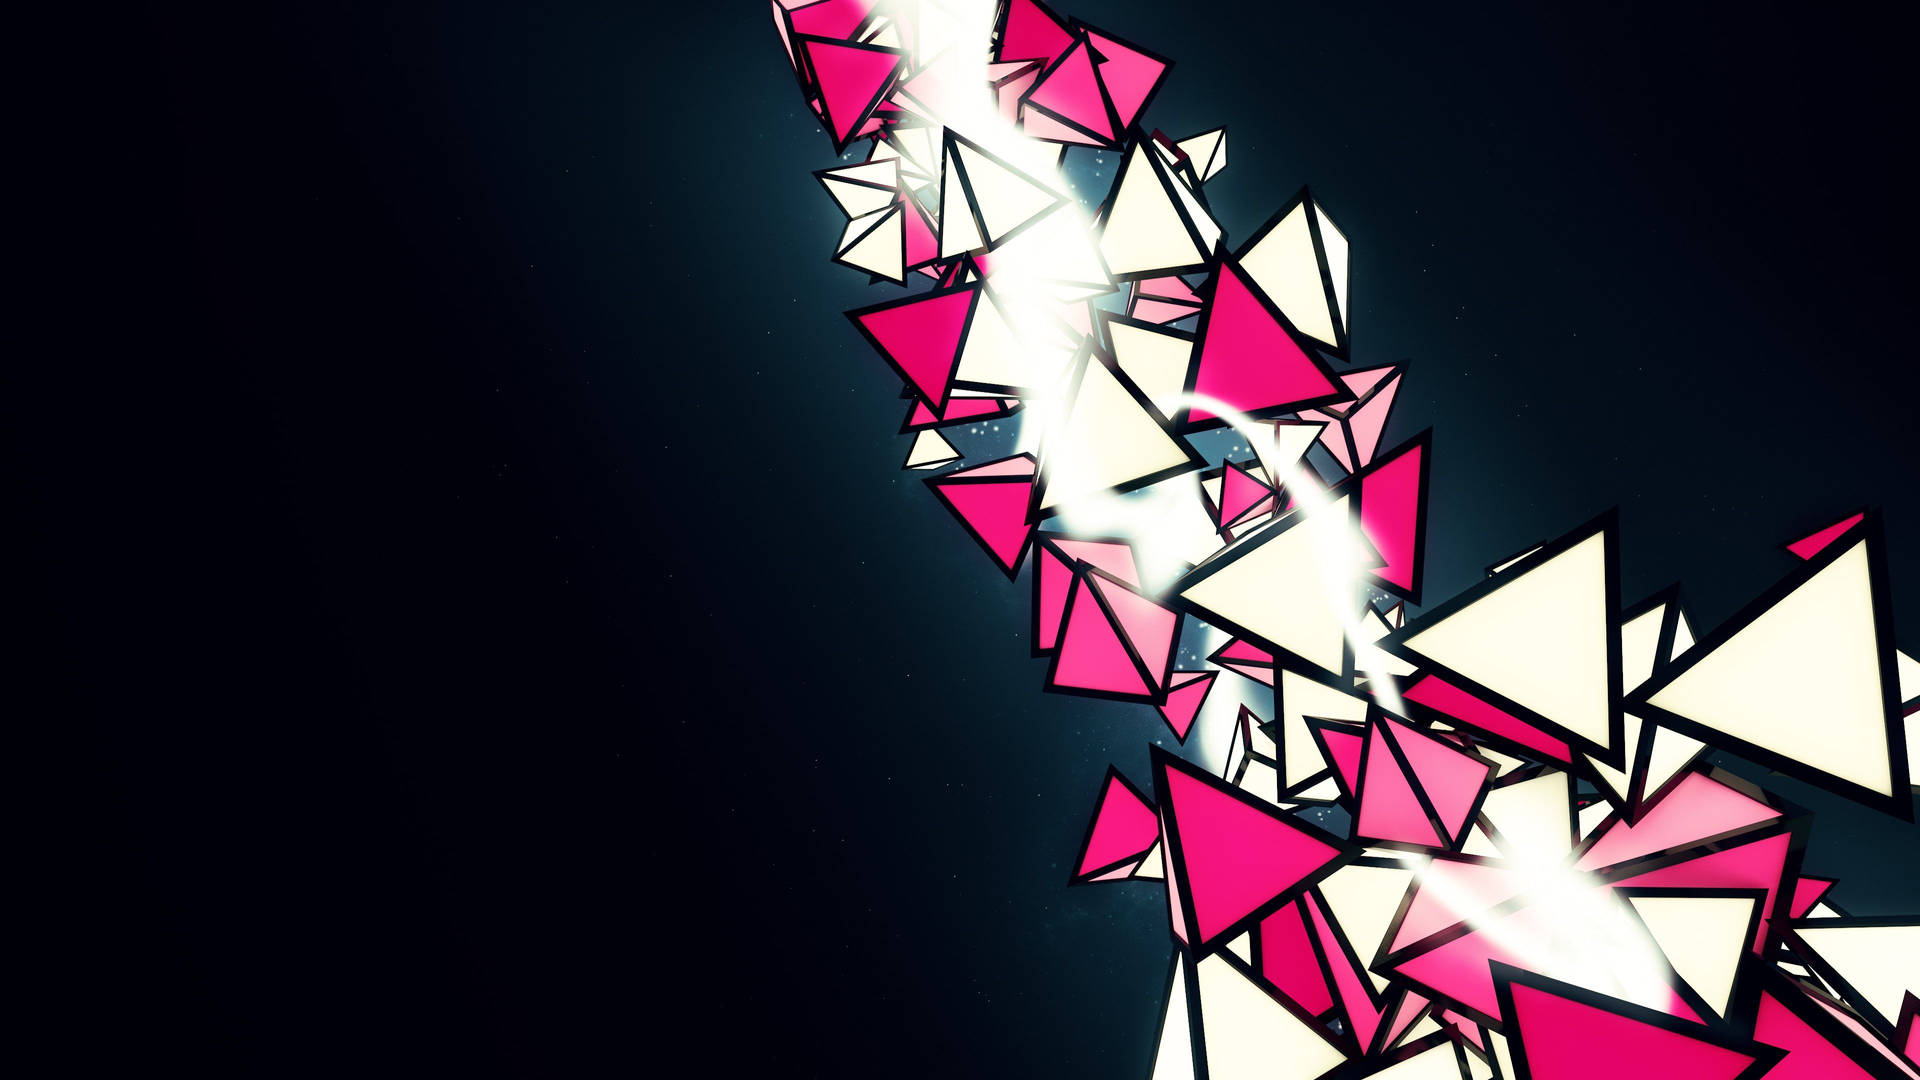 Pink And White Geometric Shapes Wallpaper